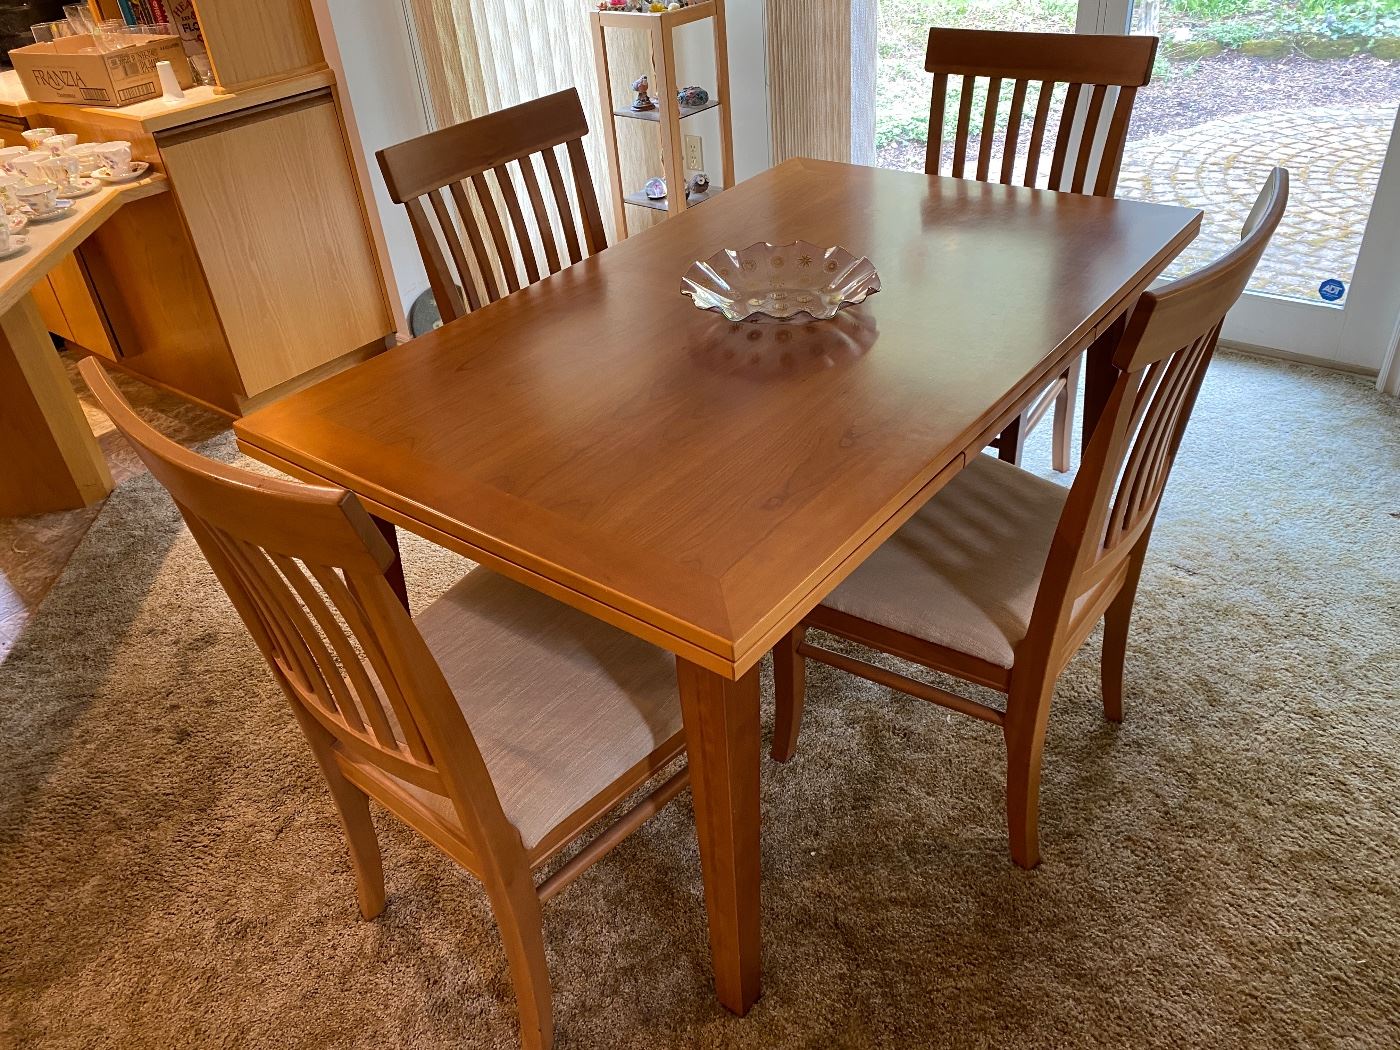 Arhaus Cherry Dining Set w/ 4 Chairs                                         Table dimensions 59” L, 35.5 W, 30.5 tall. 
Two self stored extensions 35.5” each. Can use one at a time or both for a total of 130” long. 
